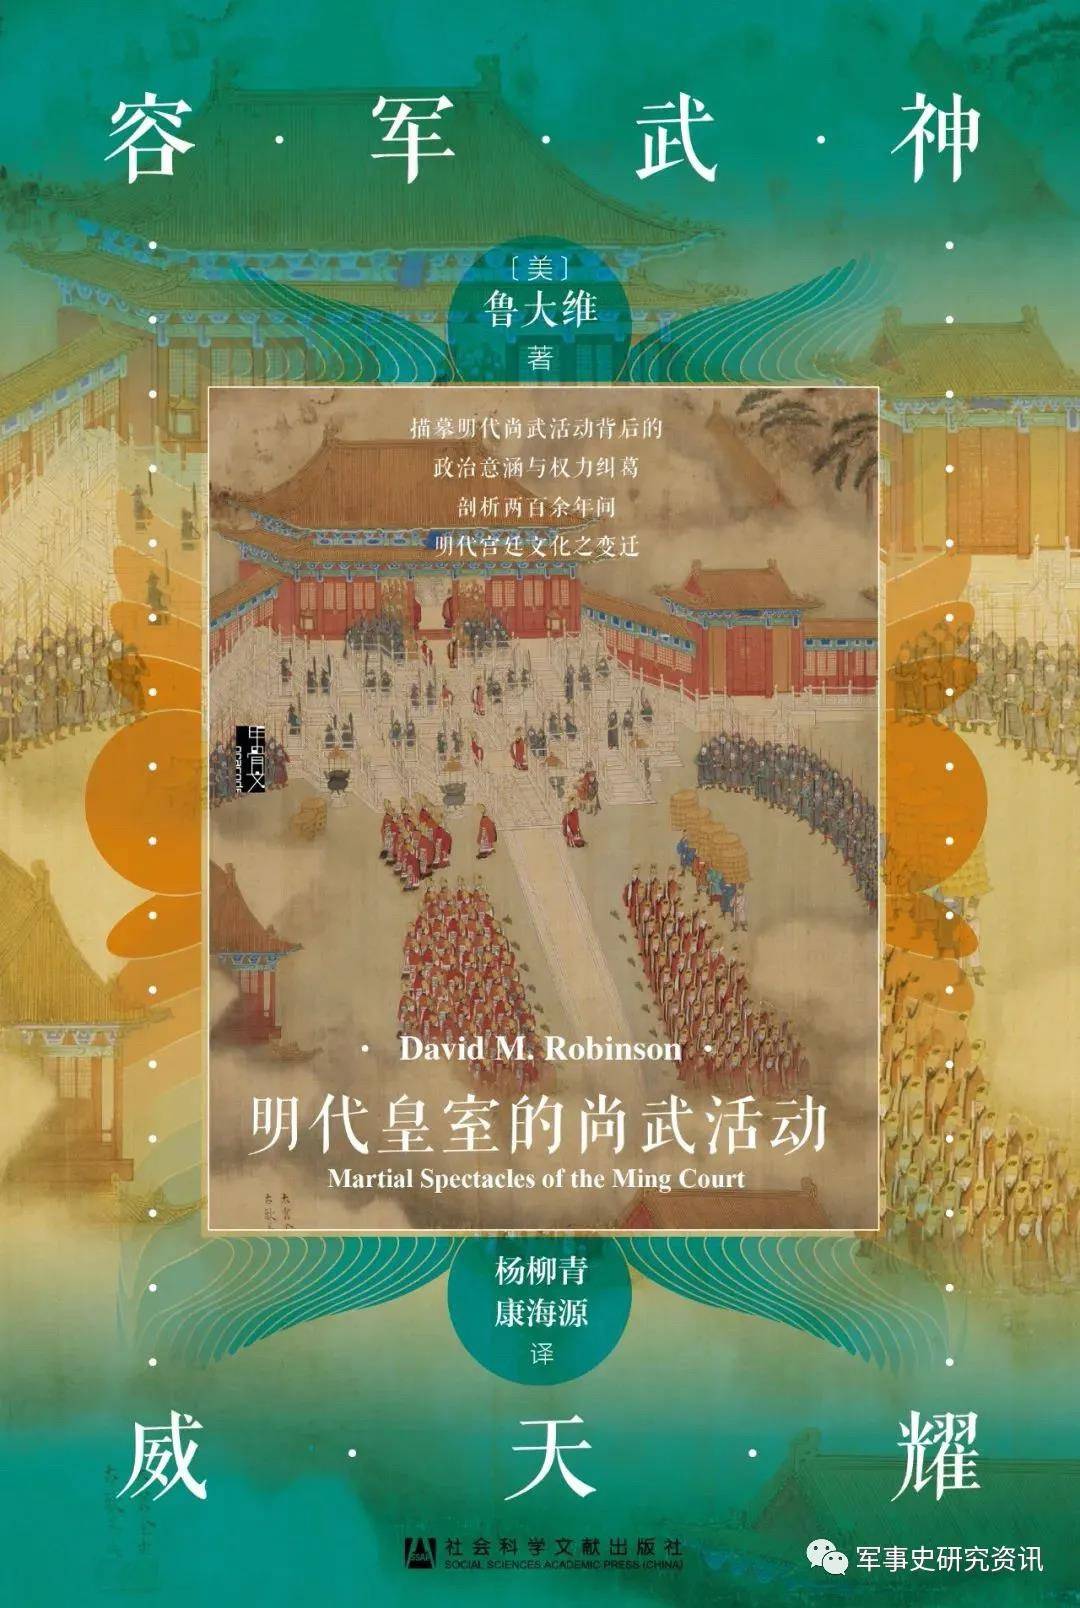 Textbook cover with Chinese text